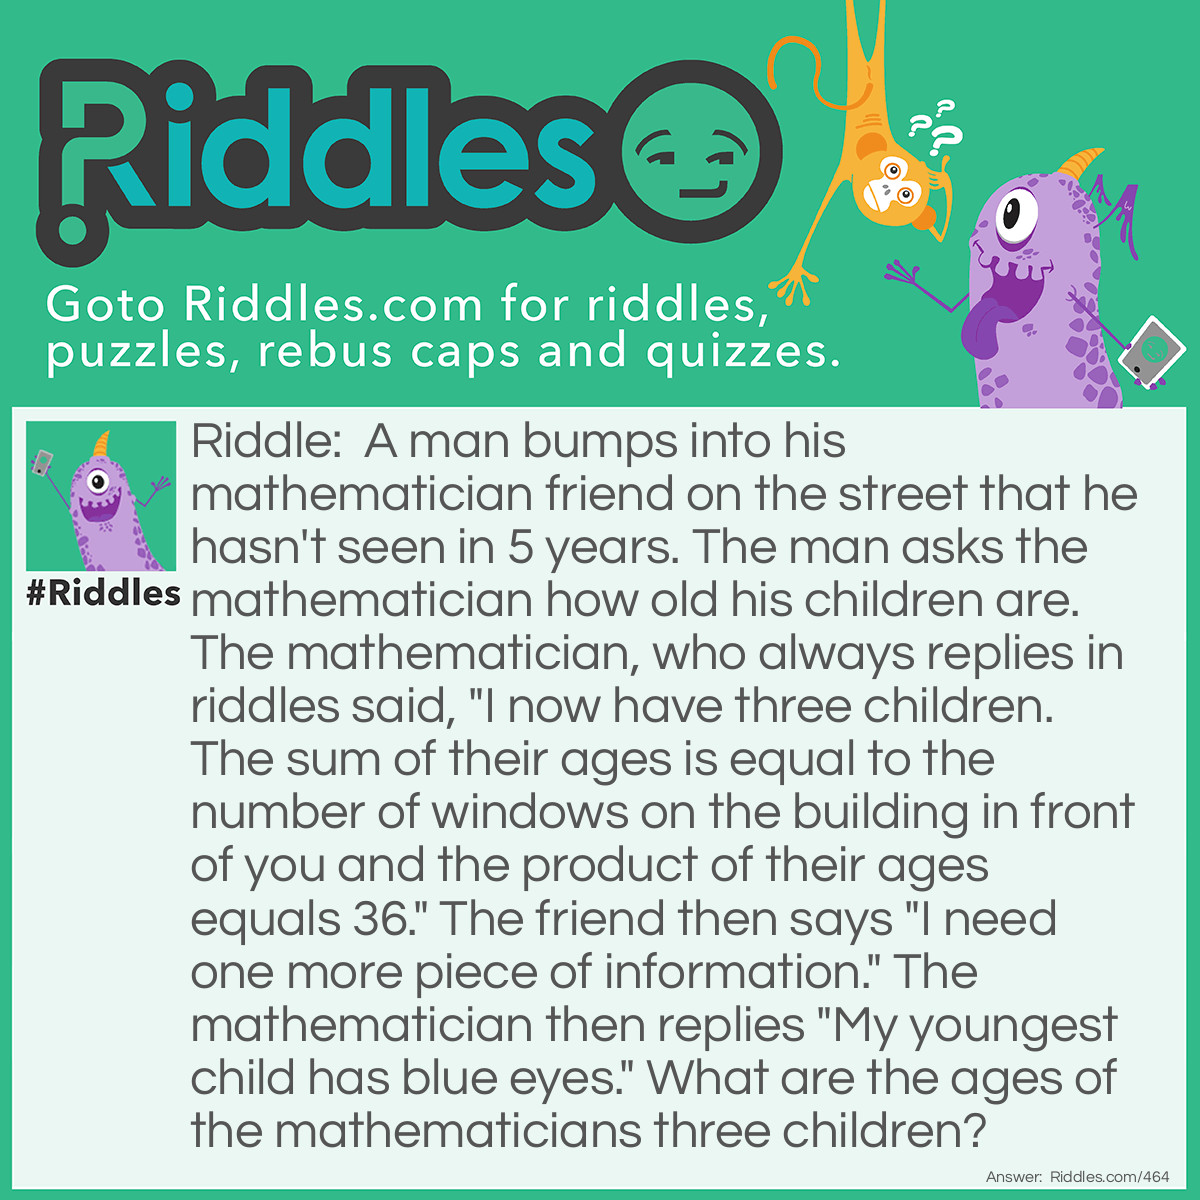 Riddle: A man bumps into his mathematician friend on the street that he hasn't seen in 5 years. The man asks the mathematician how old his children are. The mathematician, who always replies in riddles said, "I now have three children. The sum of their ages is equal to the number of windows on the building in front of you and the product of their ages equals 36." The friend then says "I need one more piece of information." The mathematician then replies "My youngest child has blue eyes." What are the ages of the mathematicians three children? Answer: They are 6, 6, and 1.